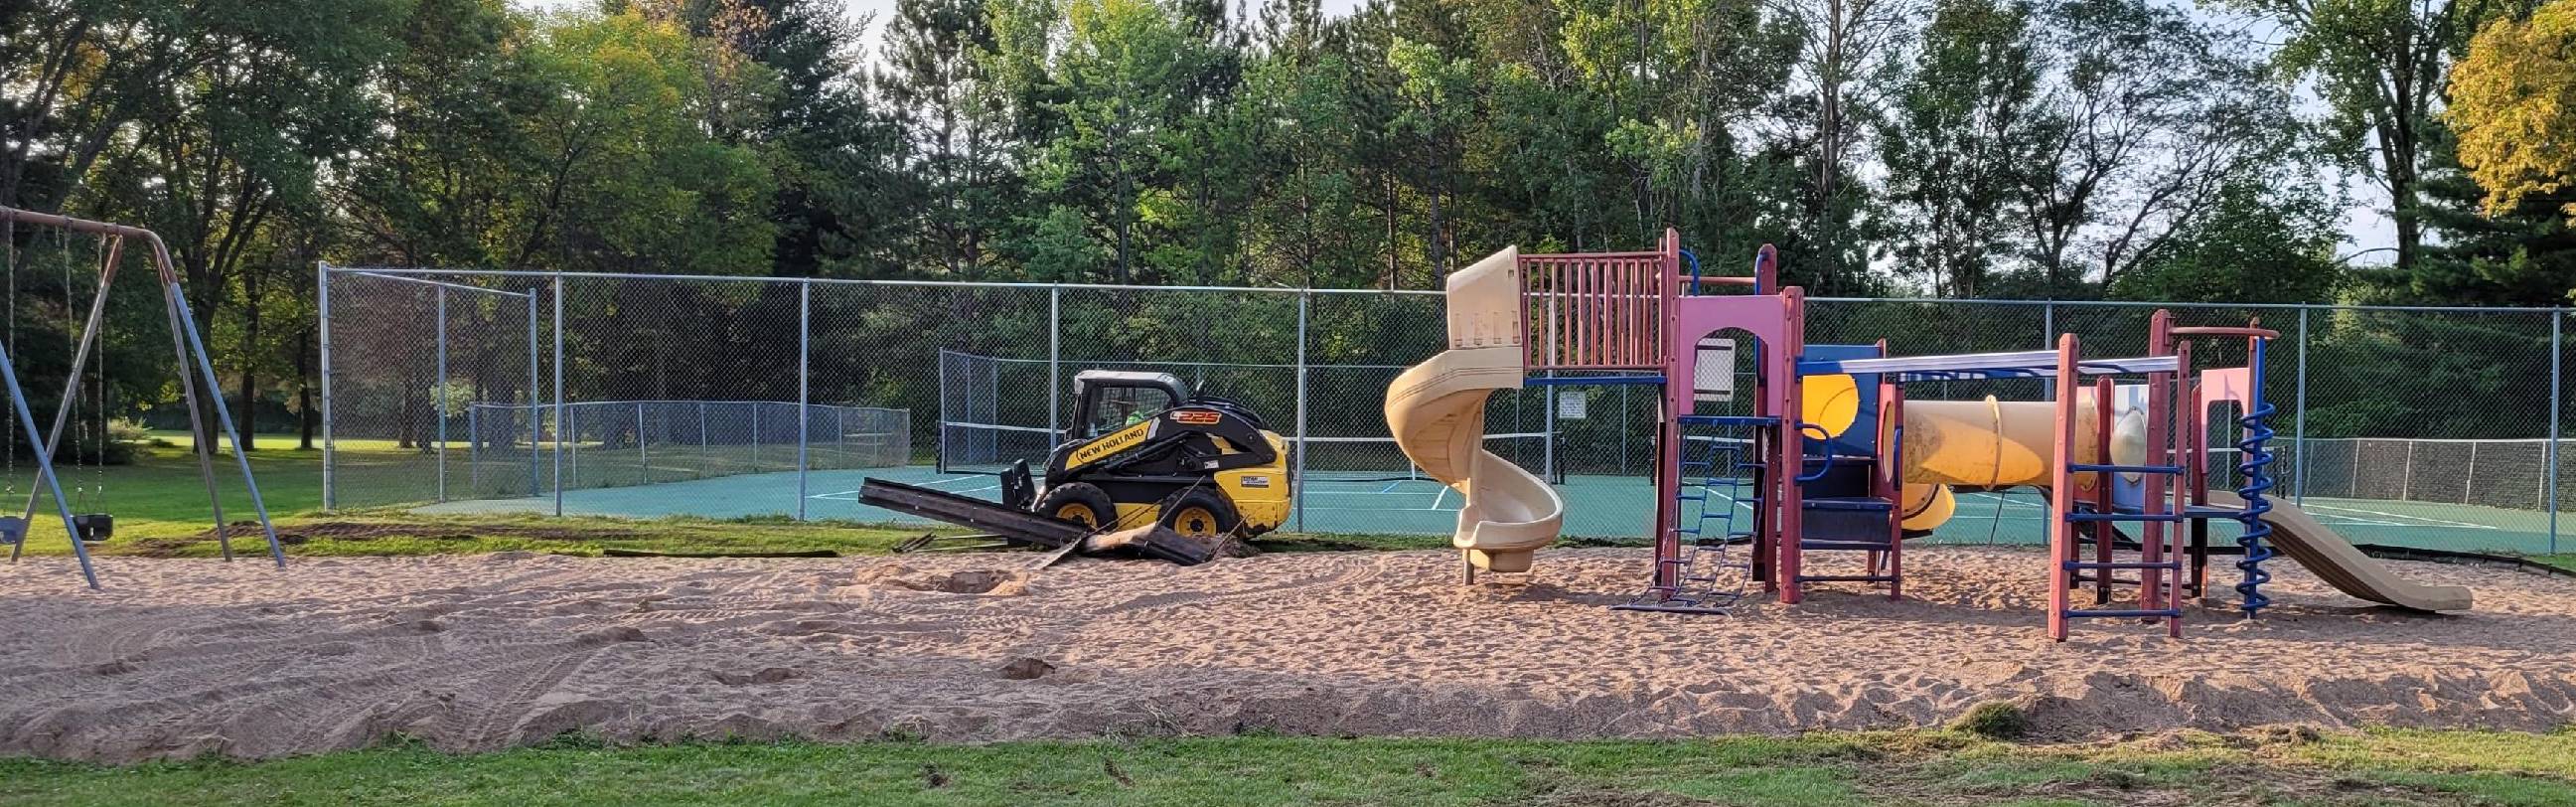 Playground Replacement In Action 